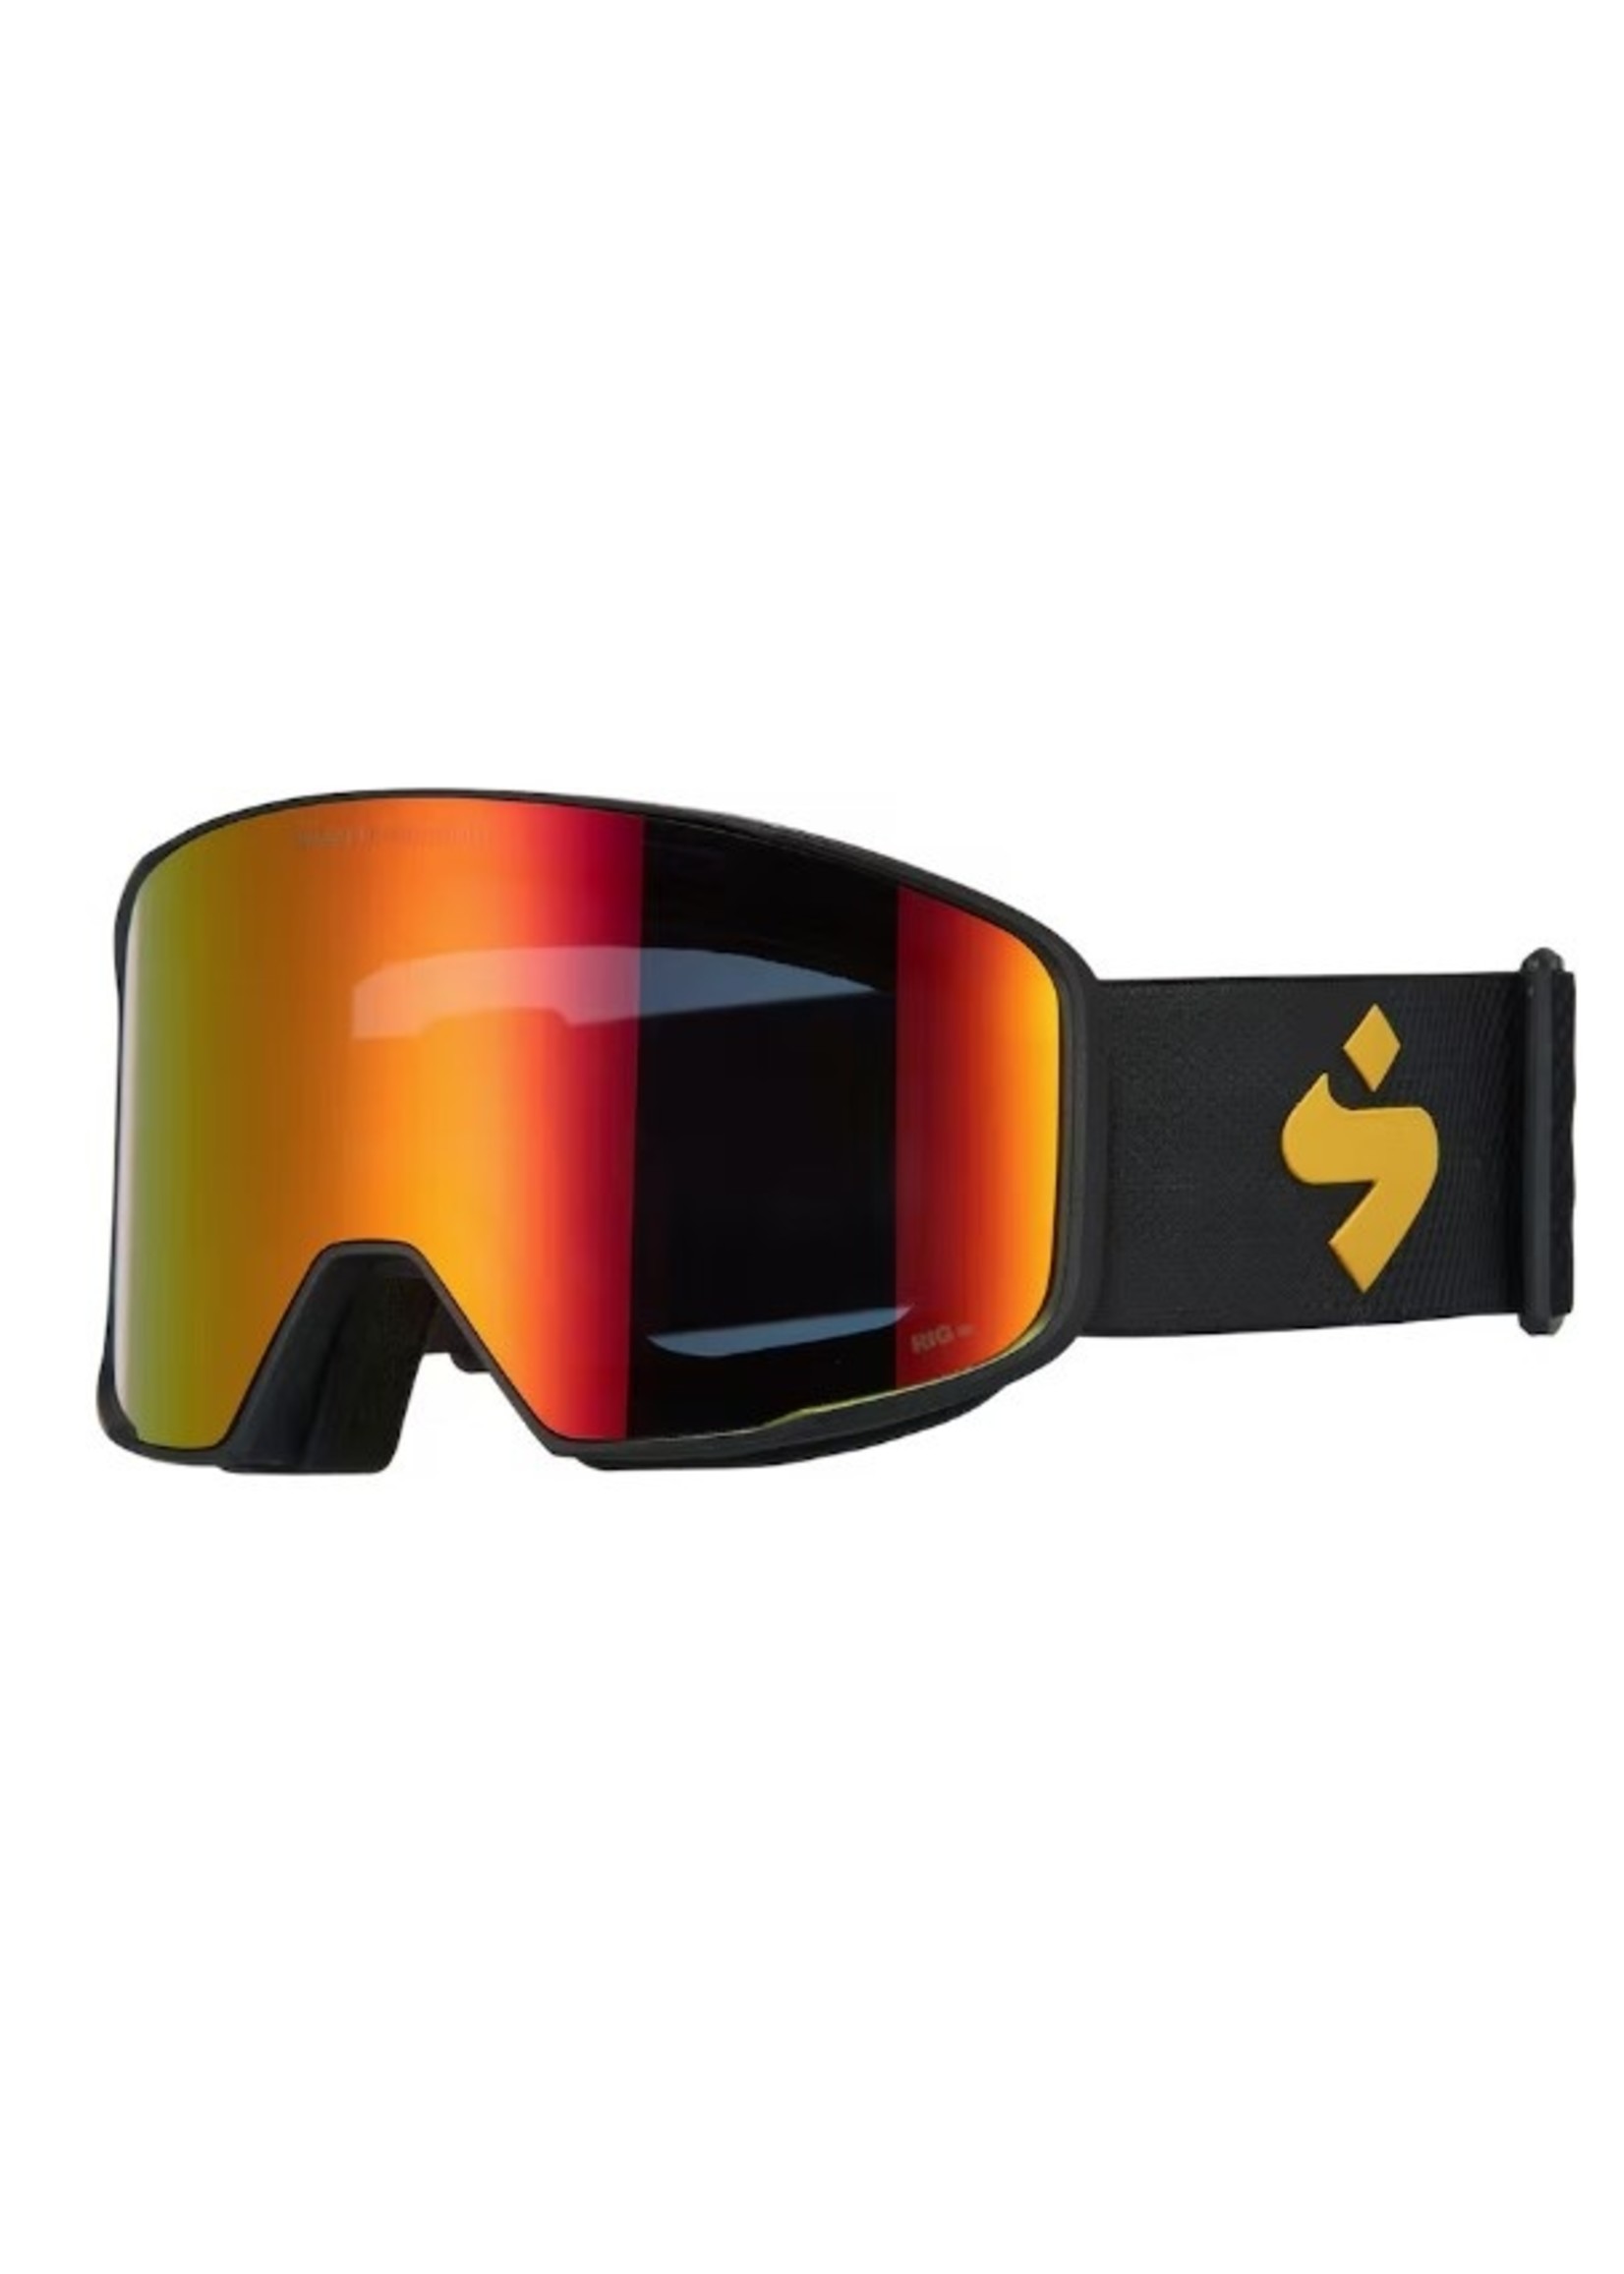 SWEET PROTECTION SWEET PROTECTION BOONDOCK RIG RFLECT GOGGLES PLUS EXTRA LENS